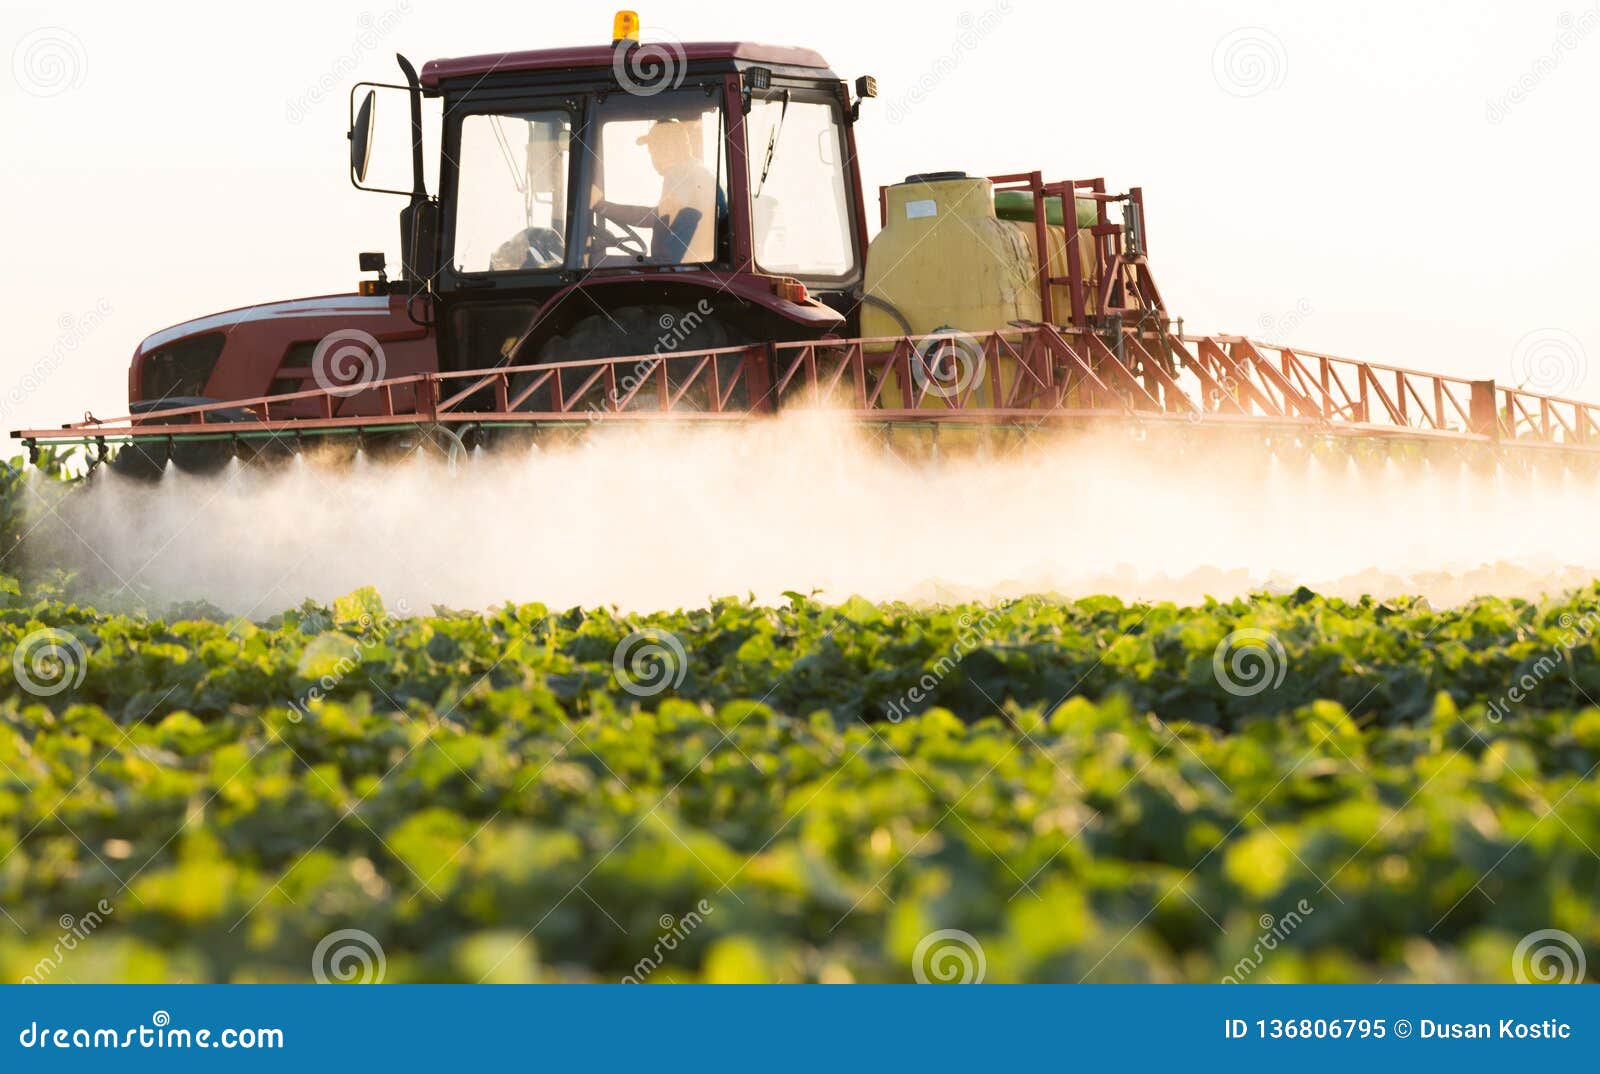 farmer on a tractor with a sprayer makes fertilizer for young vegetable